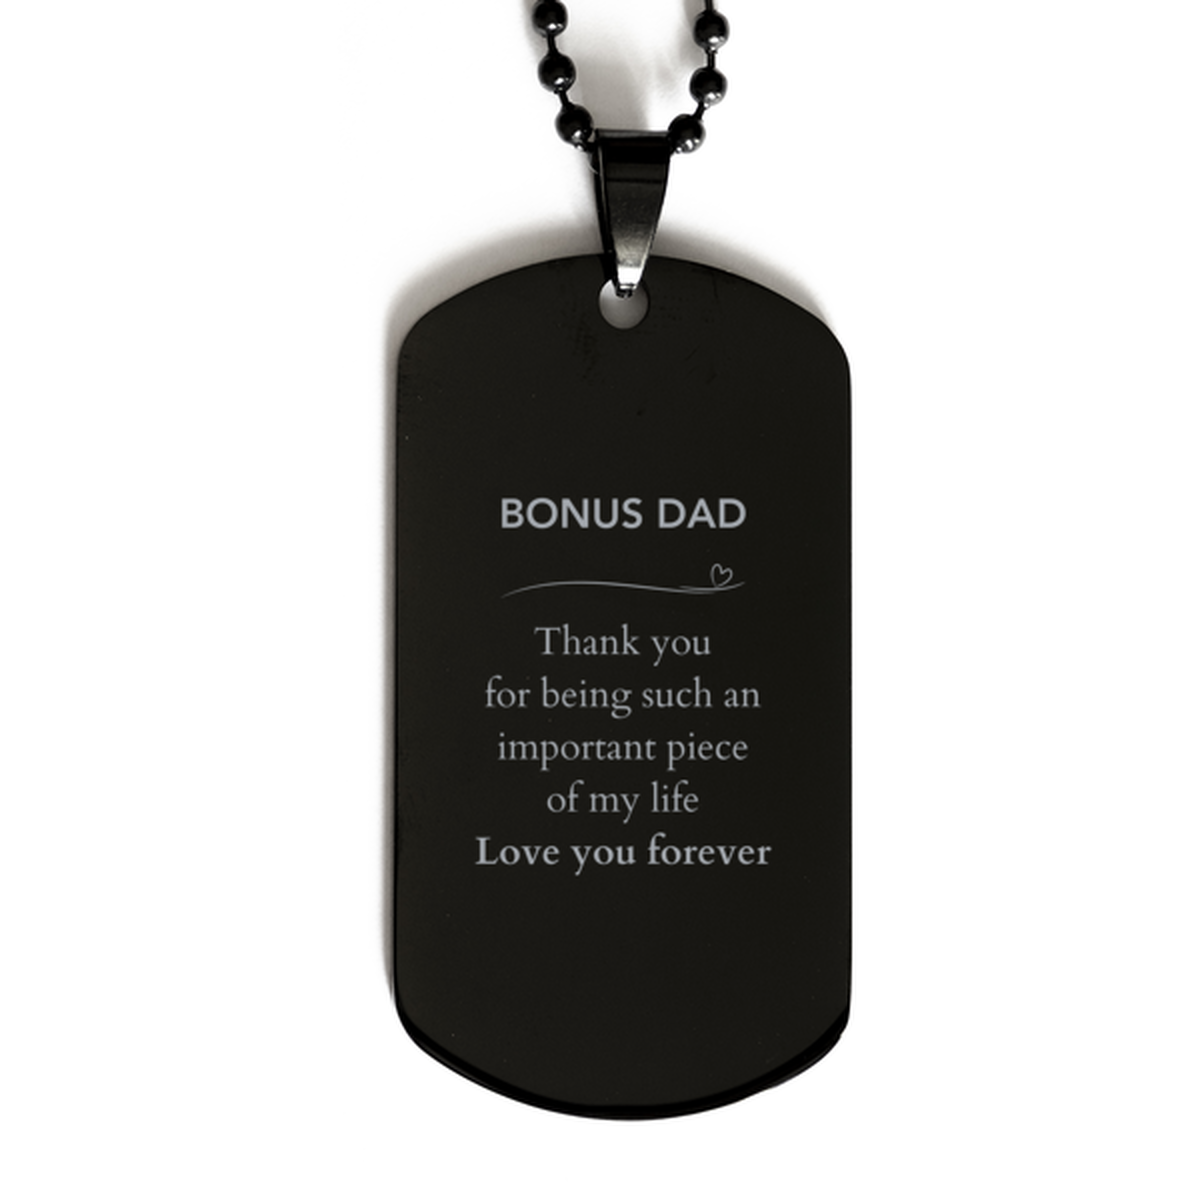 Appropriate Bonus Dad Black Dog Tag Epic Birthday Gifts for Bonus Dad Thank you for being such an important piece of my life Bonus Dad Christmas Mothers Fathers Day